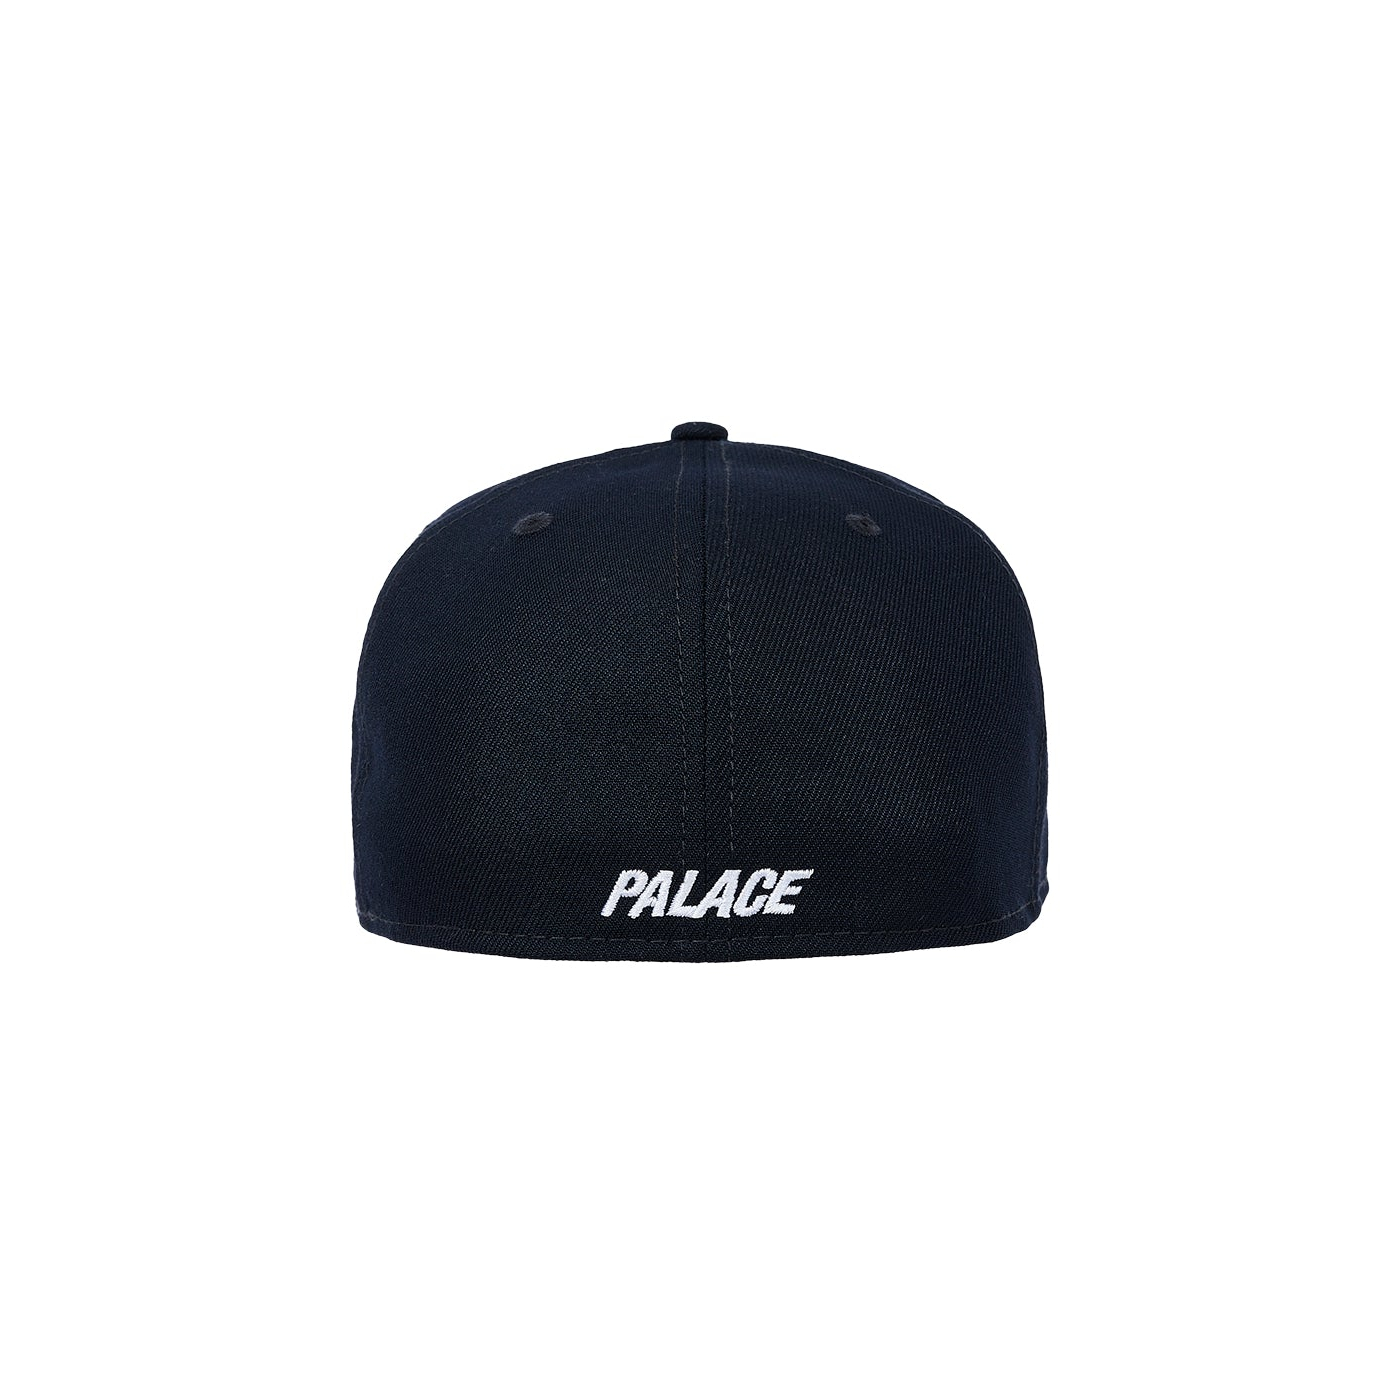 Thumbnail PALACE NEW ERA ALSATIAN 59FIFTY NAVY one color